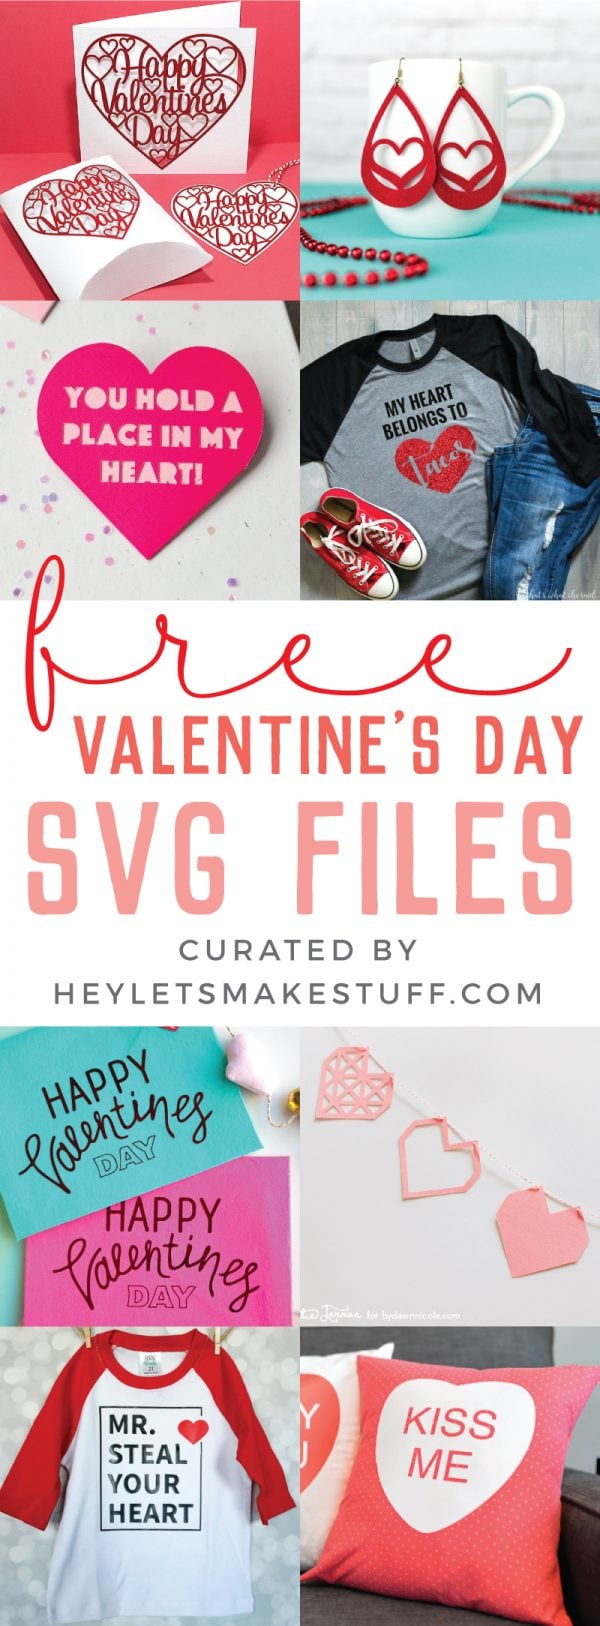 Download Free SVG Files for Valentine's Day - Hey, Let's Make Stuff